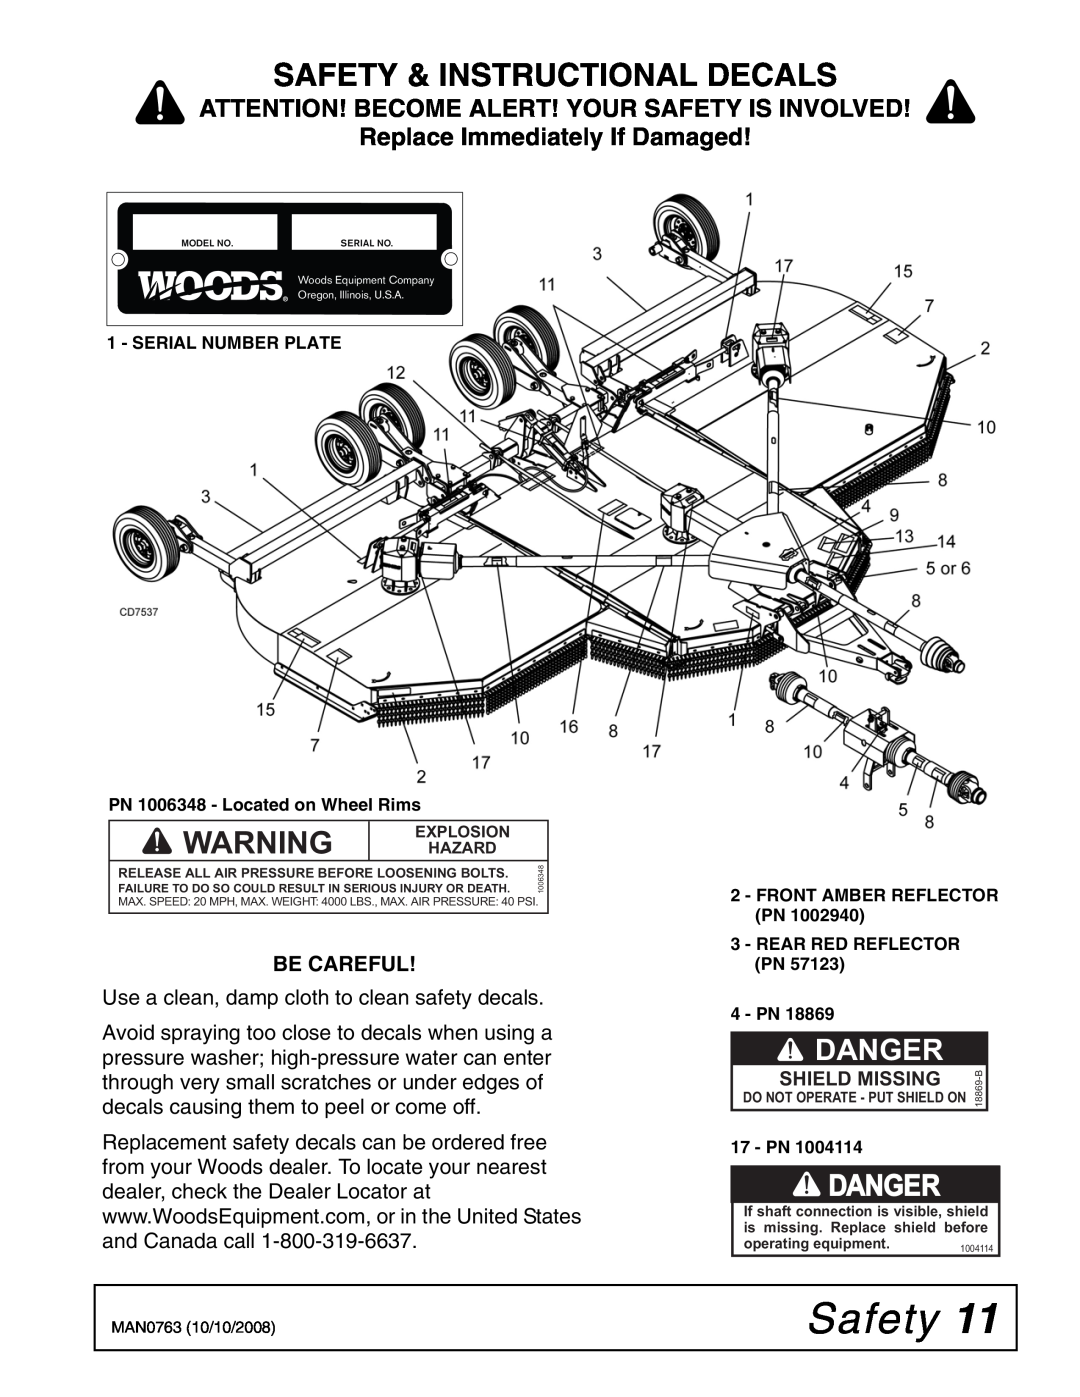 Woods Equipment BW240HD manual Safety & Instructional Decals, Danger, Attention! Become Alert! Your Safety Is Involved, Pn 